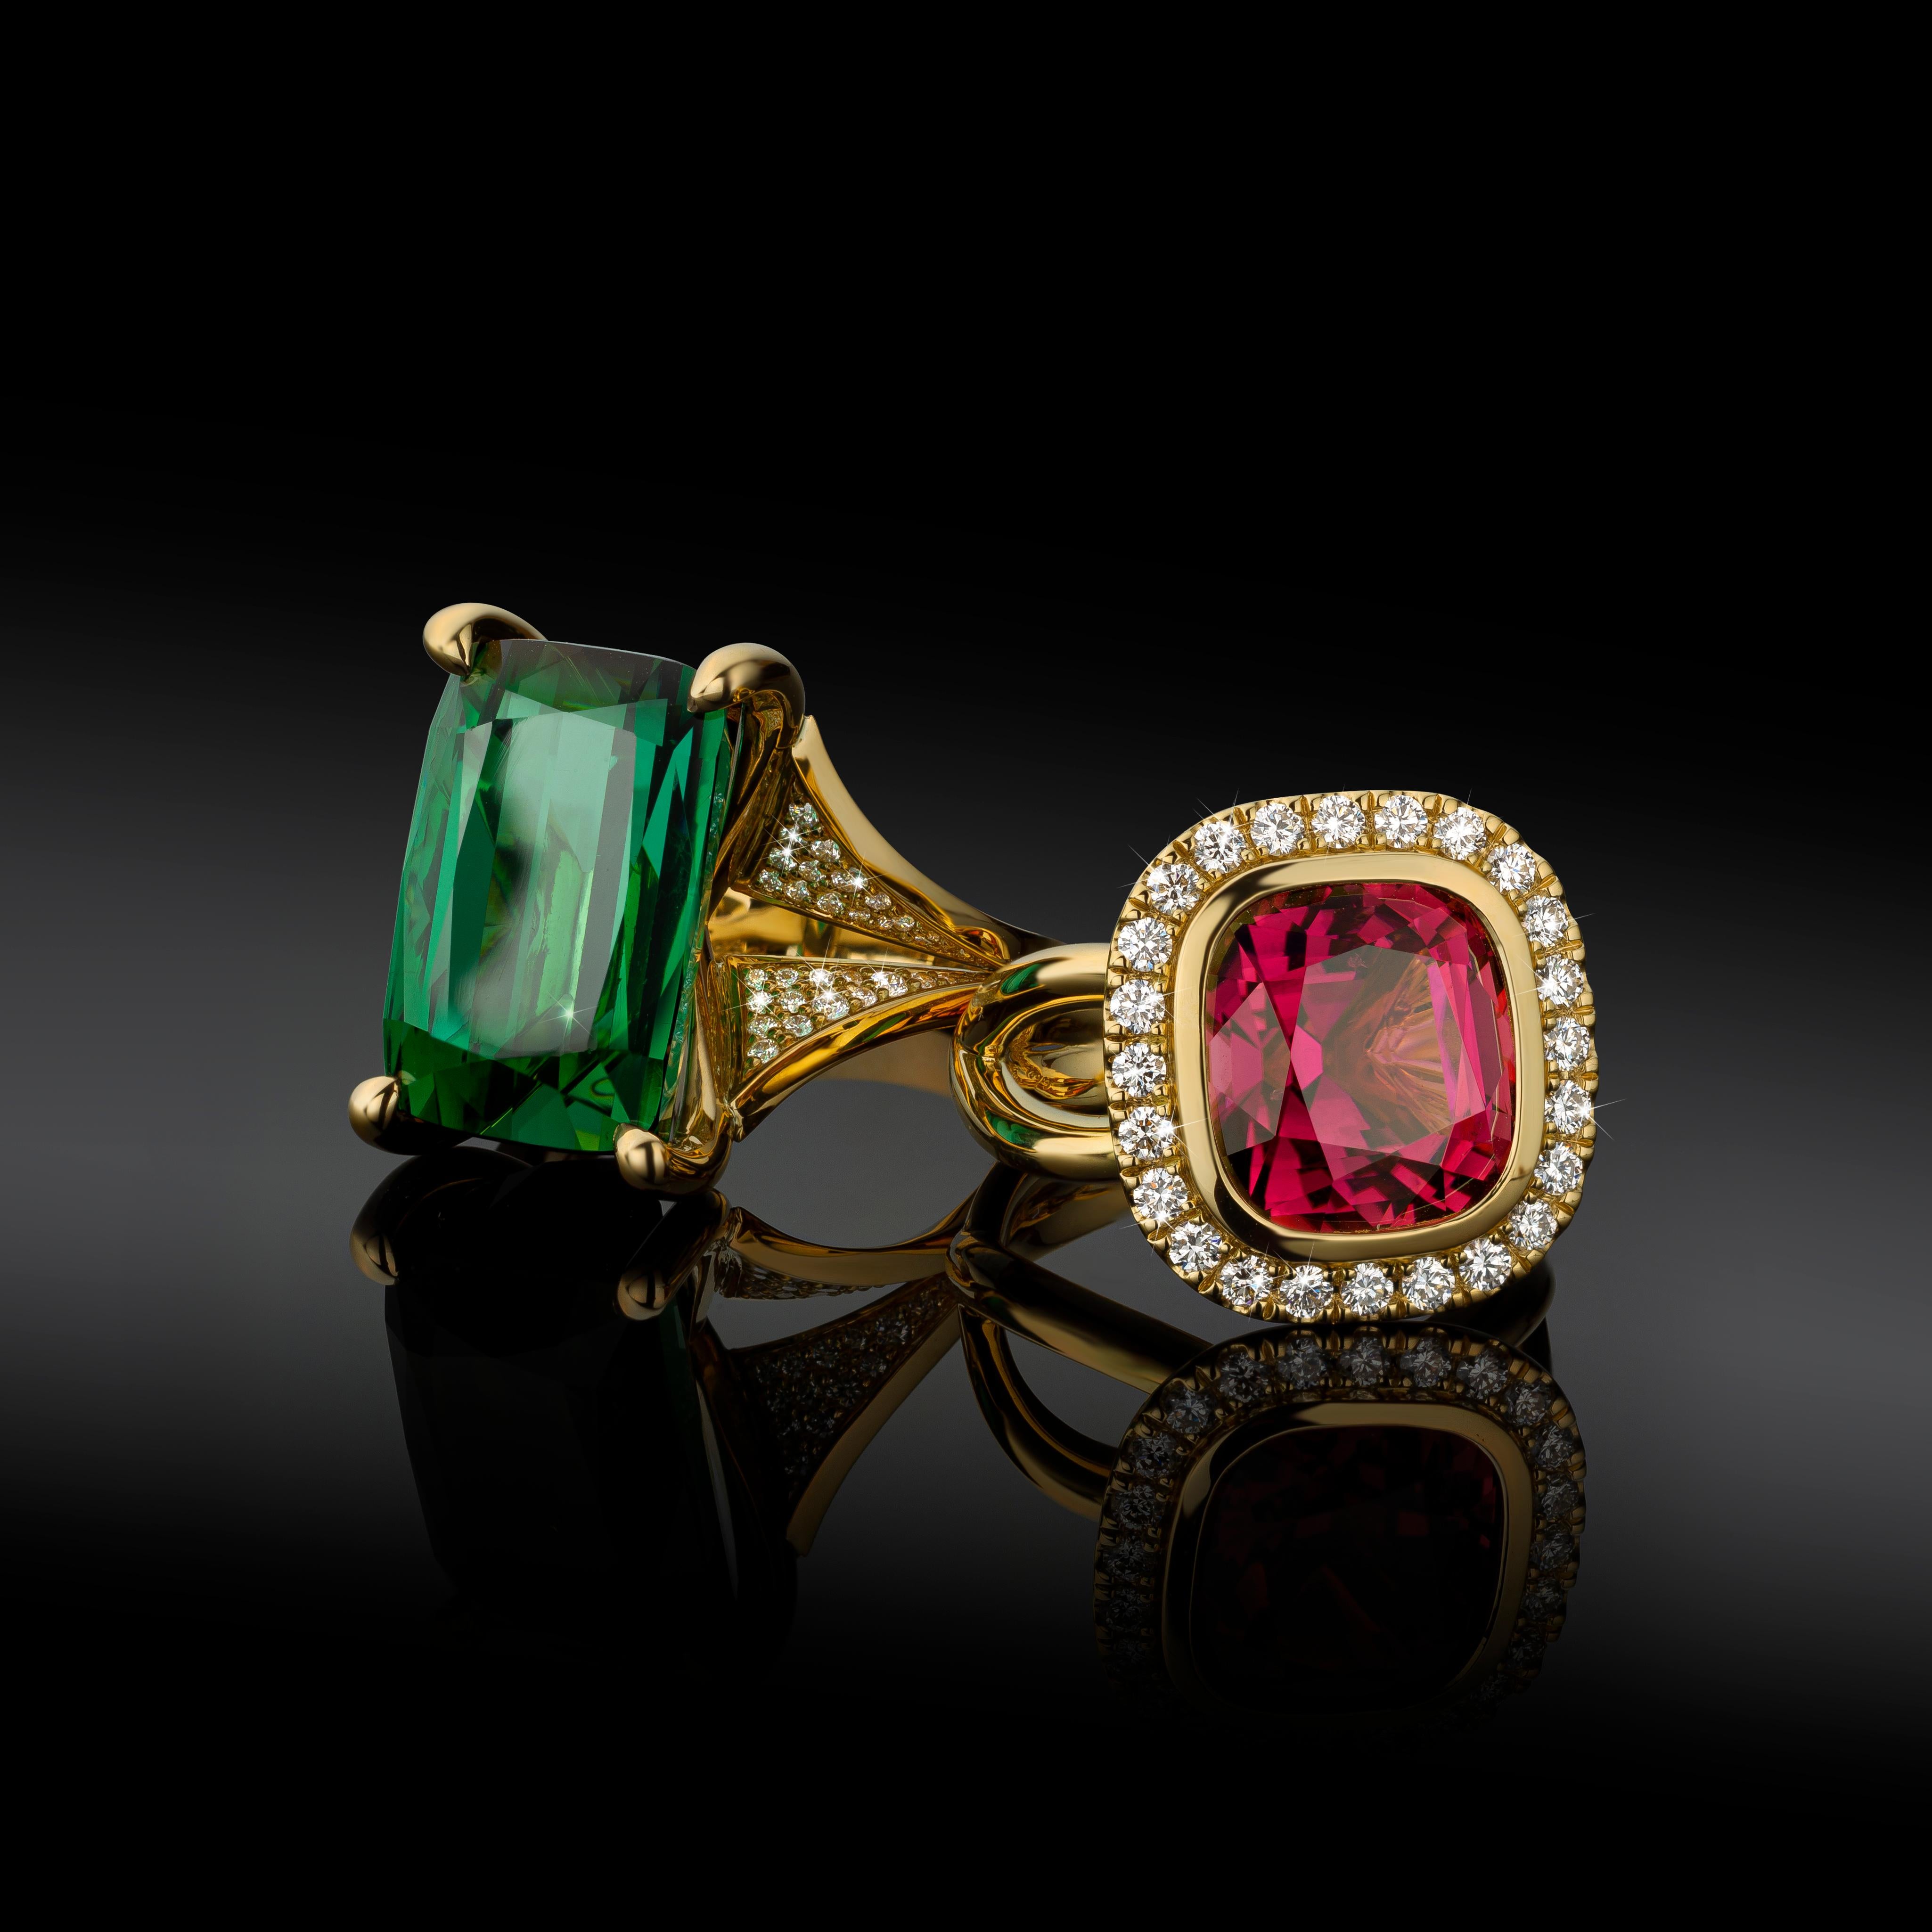 Cober “Playful Pink” with a deep pink Tourmaline and 24 Diamonds YellowGold Ring 3